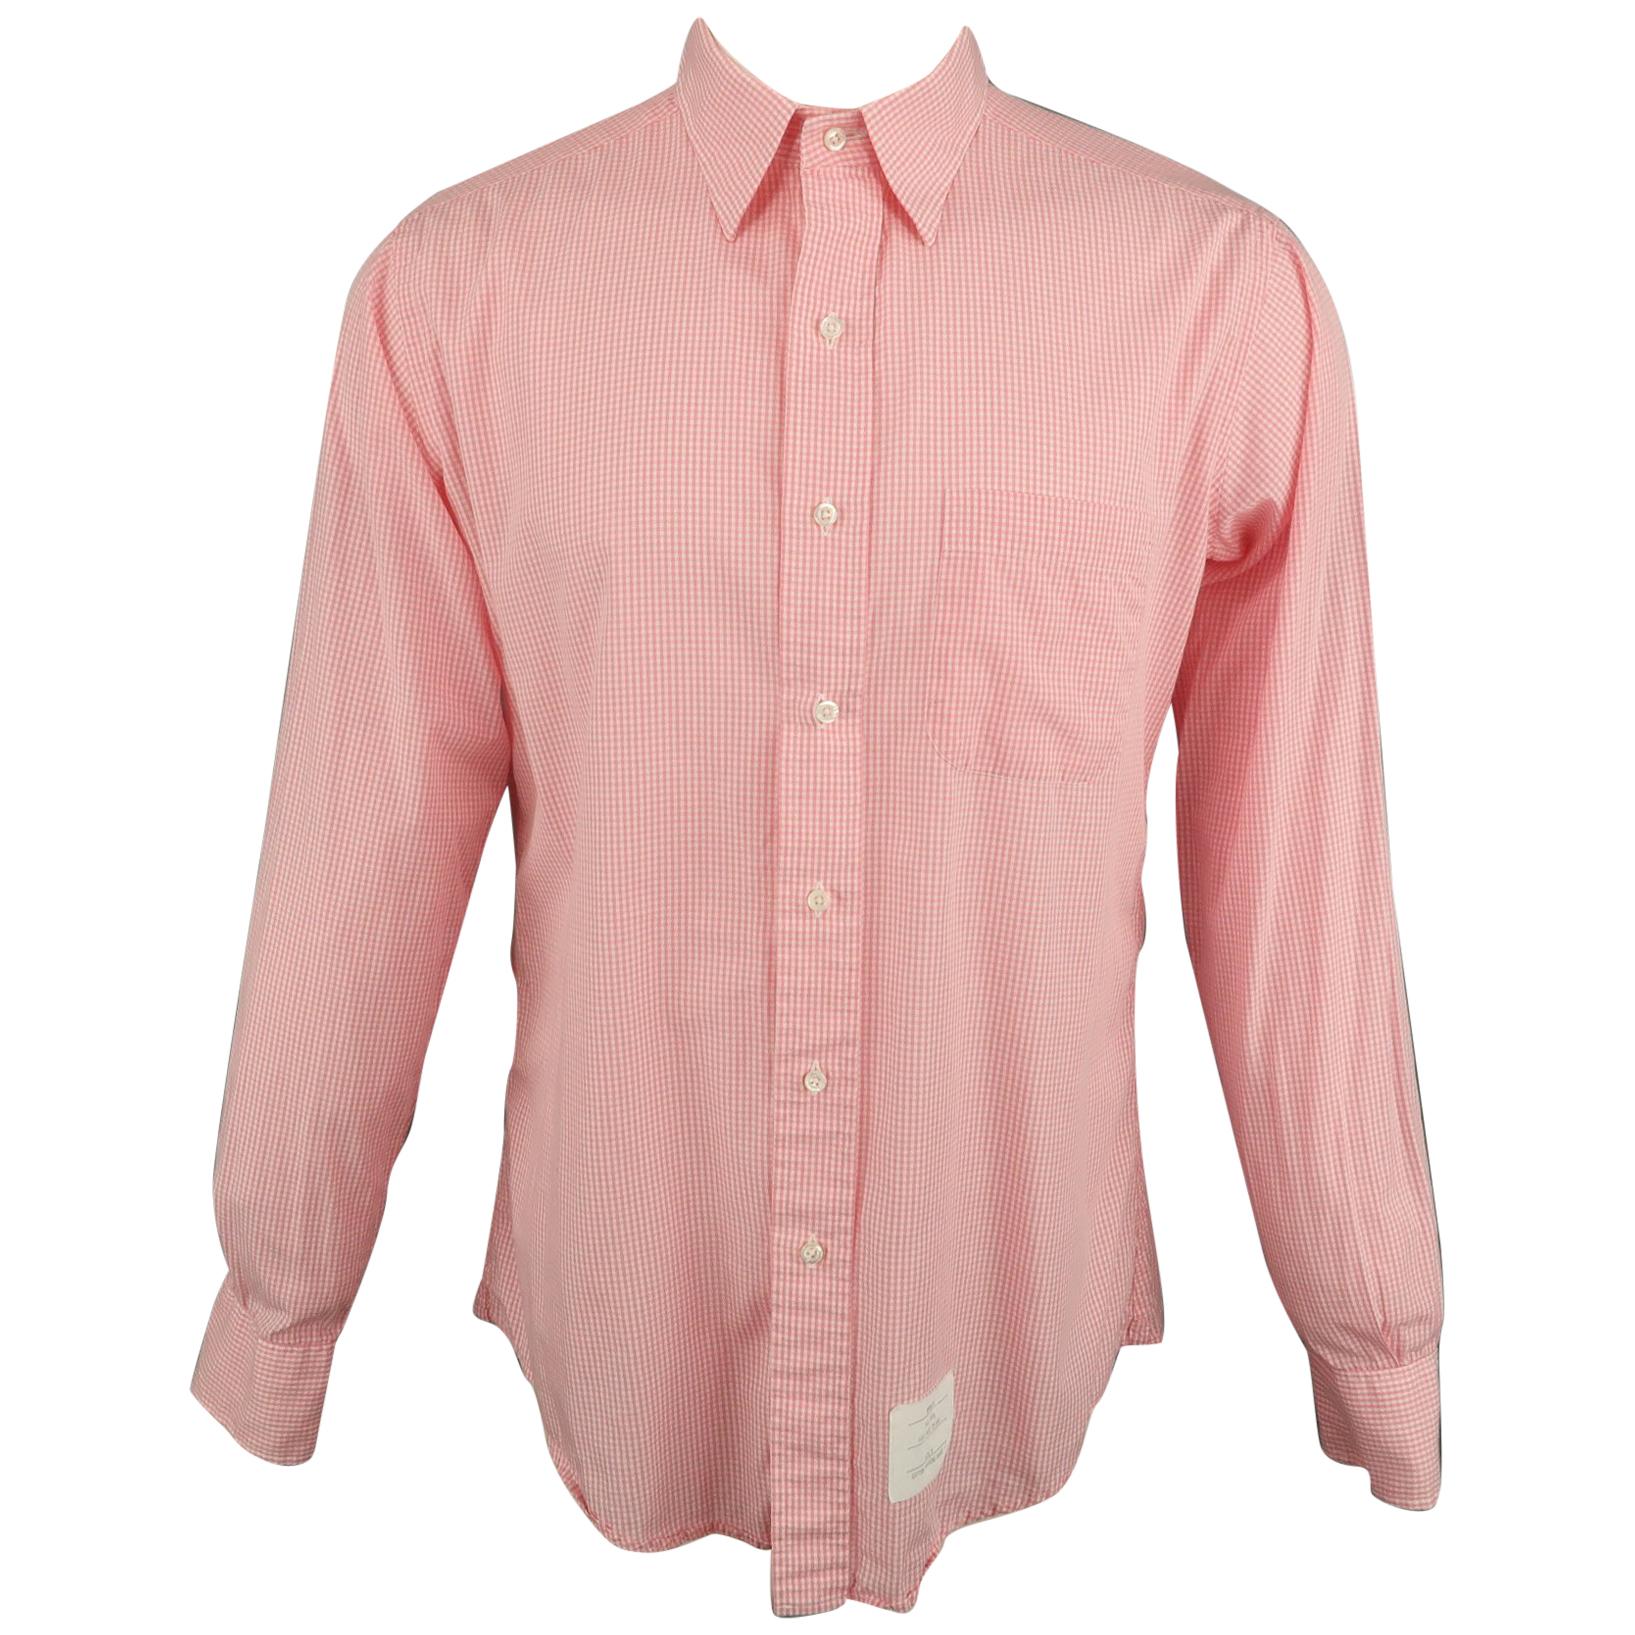  THOM BROWNE Size XL Pink Plaid Cotton Button Up Long Sleeve Shirt